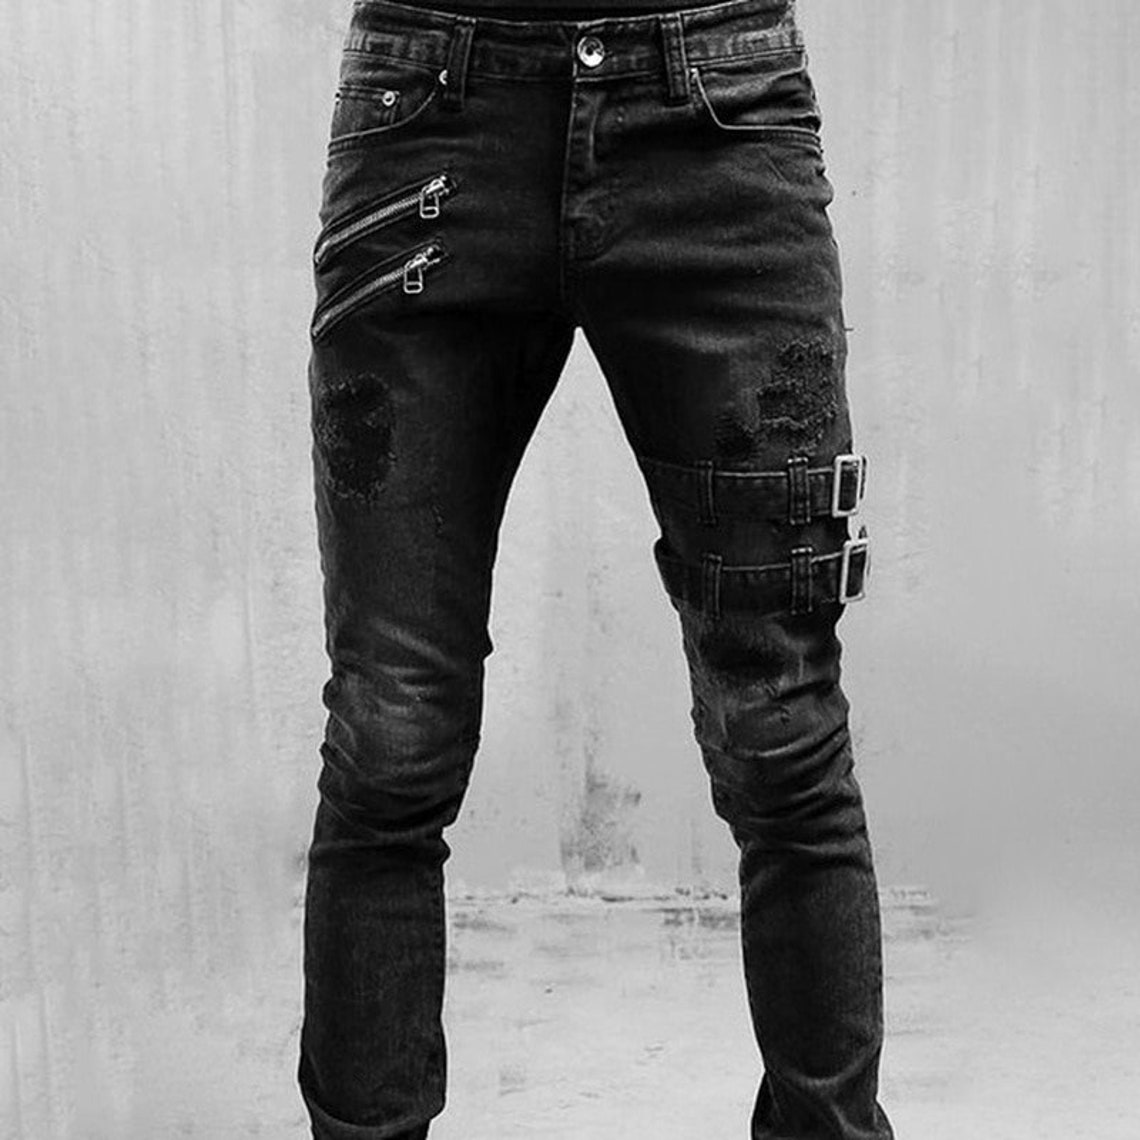 Black Denim Jeans Trousers Pants New Gift High Quality Pants - Etsy